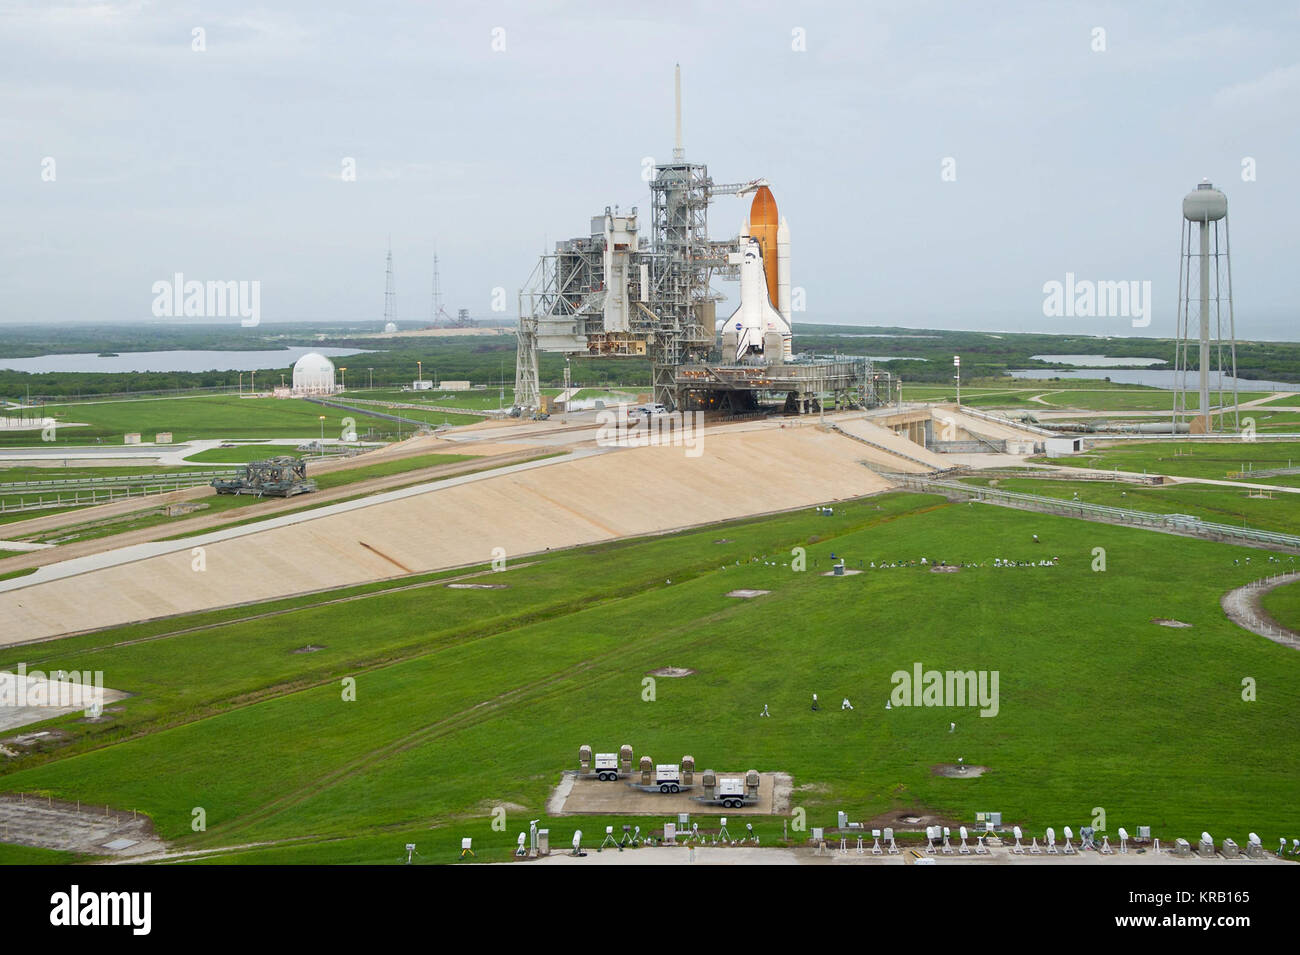 Space shuttle Atlantis is seen on launch pad 39a moments before the STS-135 crew arrives for their launch for the launch, Friday, July 8, 2011, at the NASA Kennedy Space Center in Cape Canaveral, Fla. The launch of Atlantis, STS-135, is the final flight of the shuttle program, a 12-day mission to the International Space Station.  Photo Credit: (NASA/Bill Ingalls) Shuttle Atlantis moments before STS-135 crew boards Stock Photo